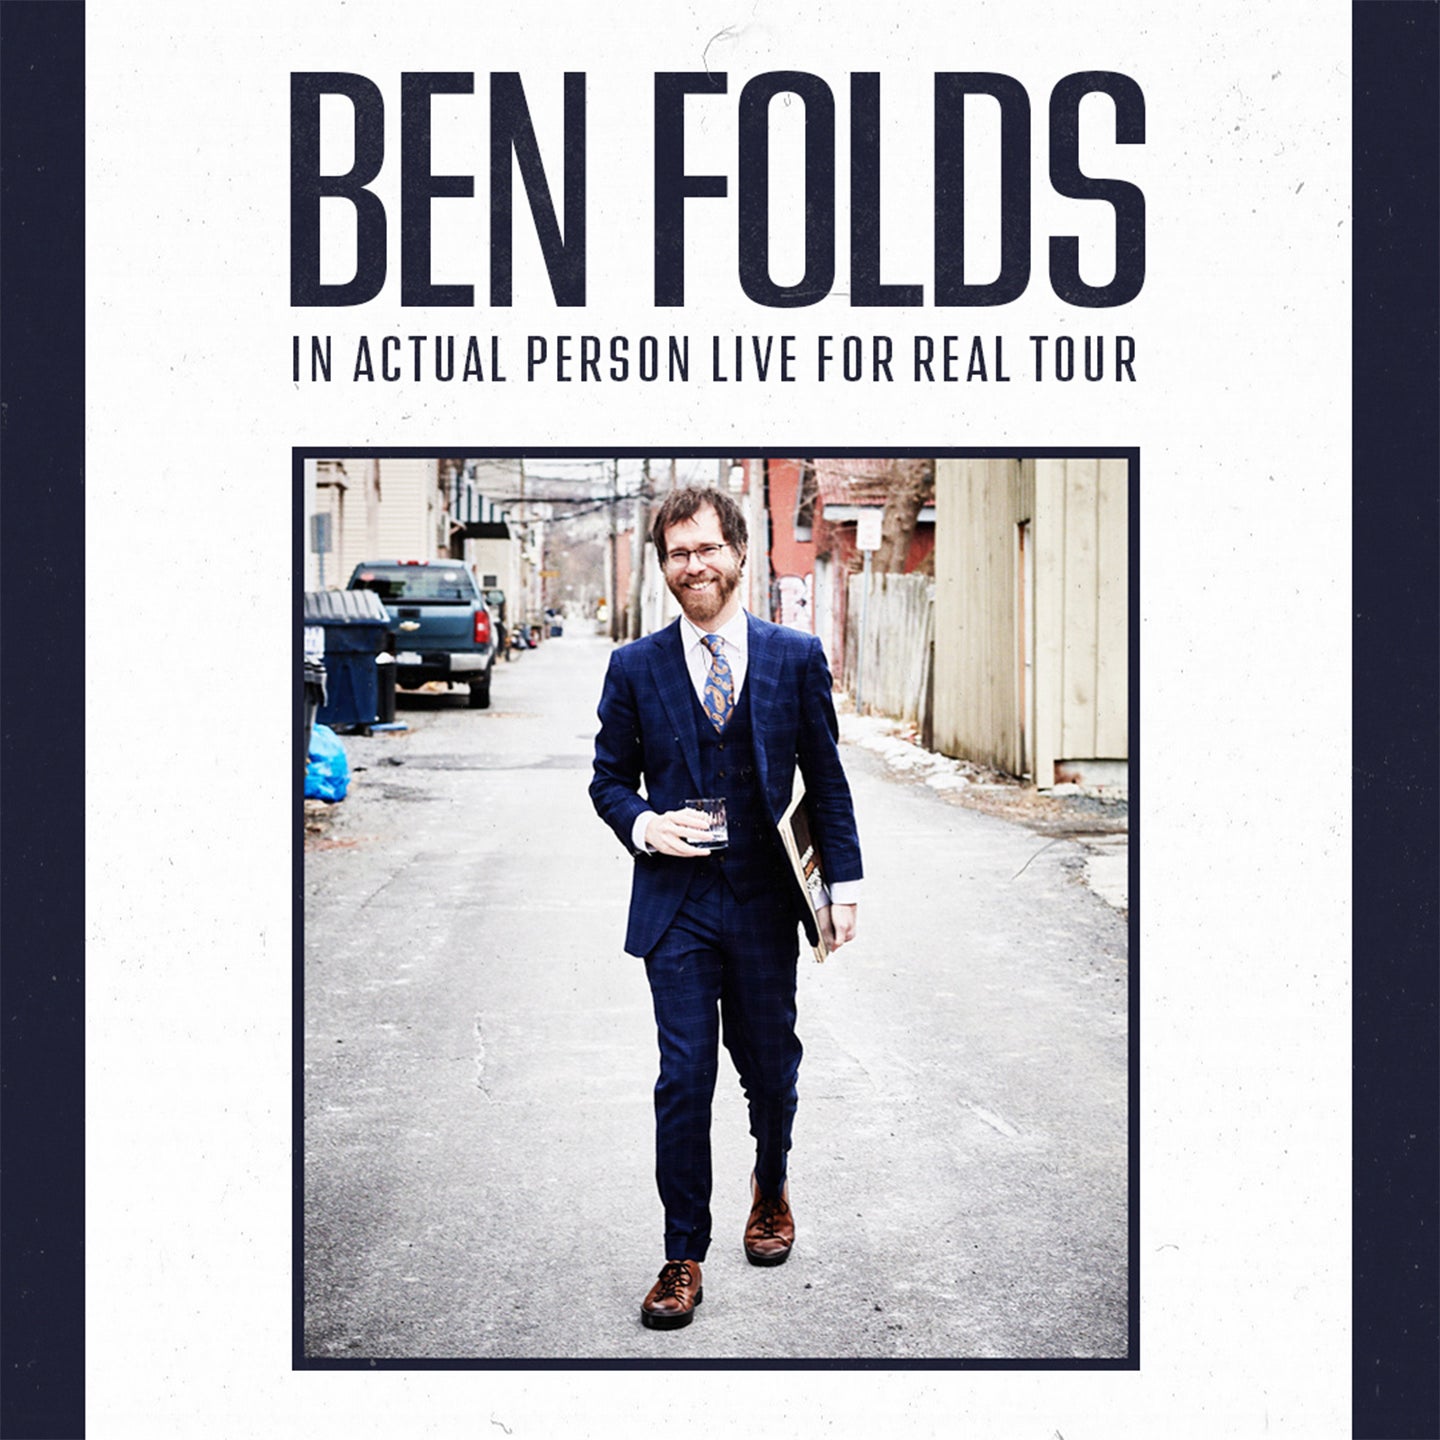 Ben Folds In Actual Person Live For Real Tour Blumenthal Performing Arts